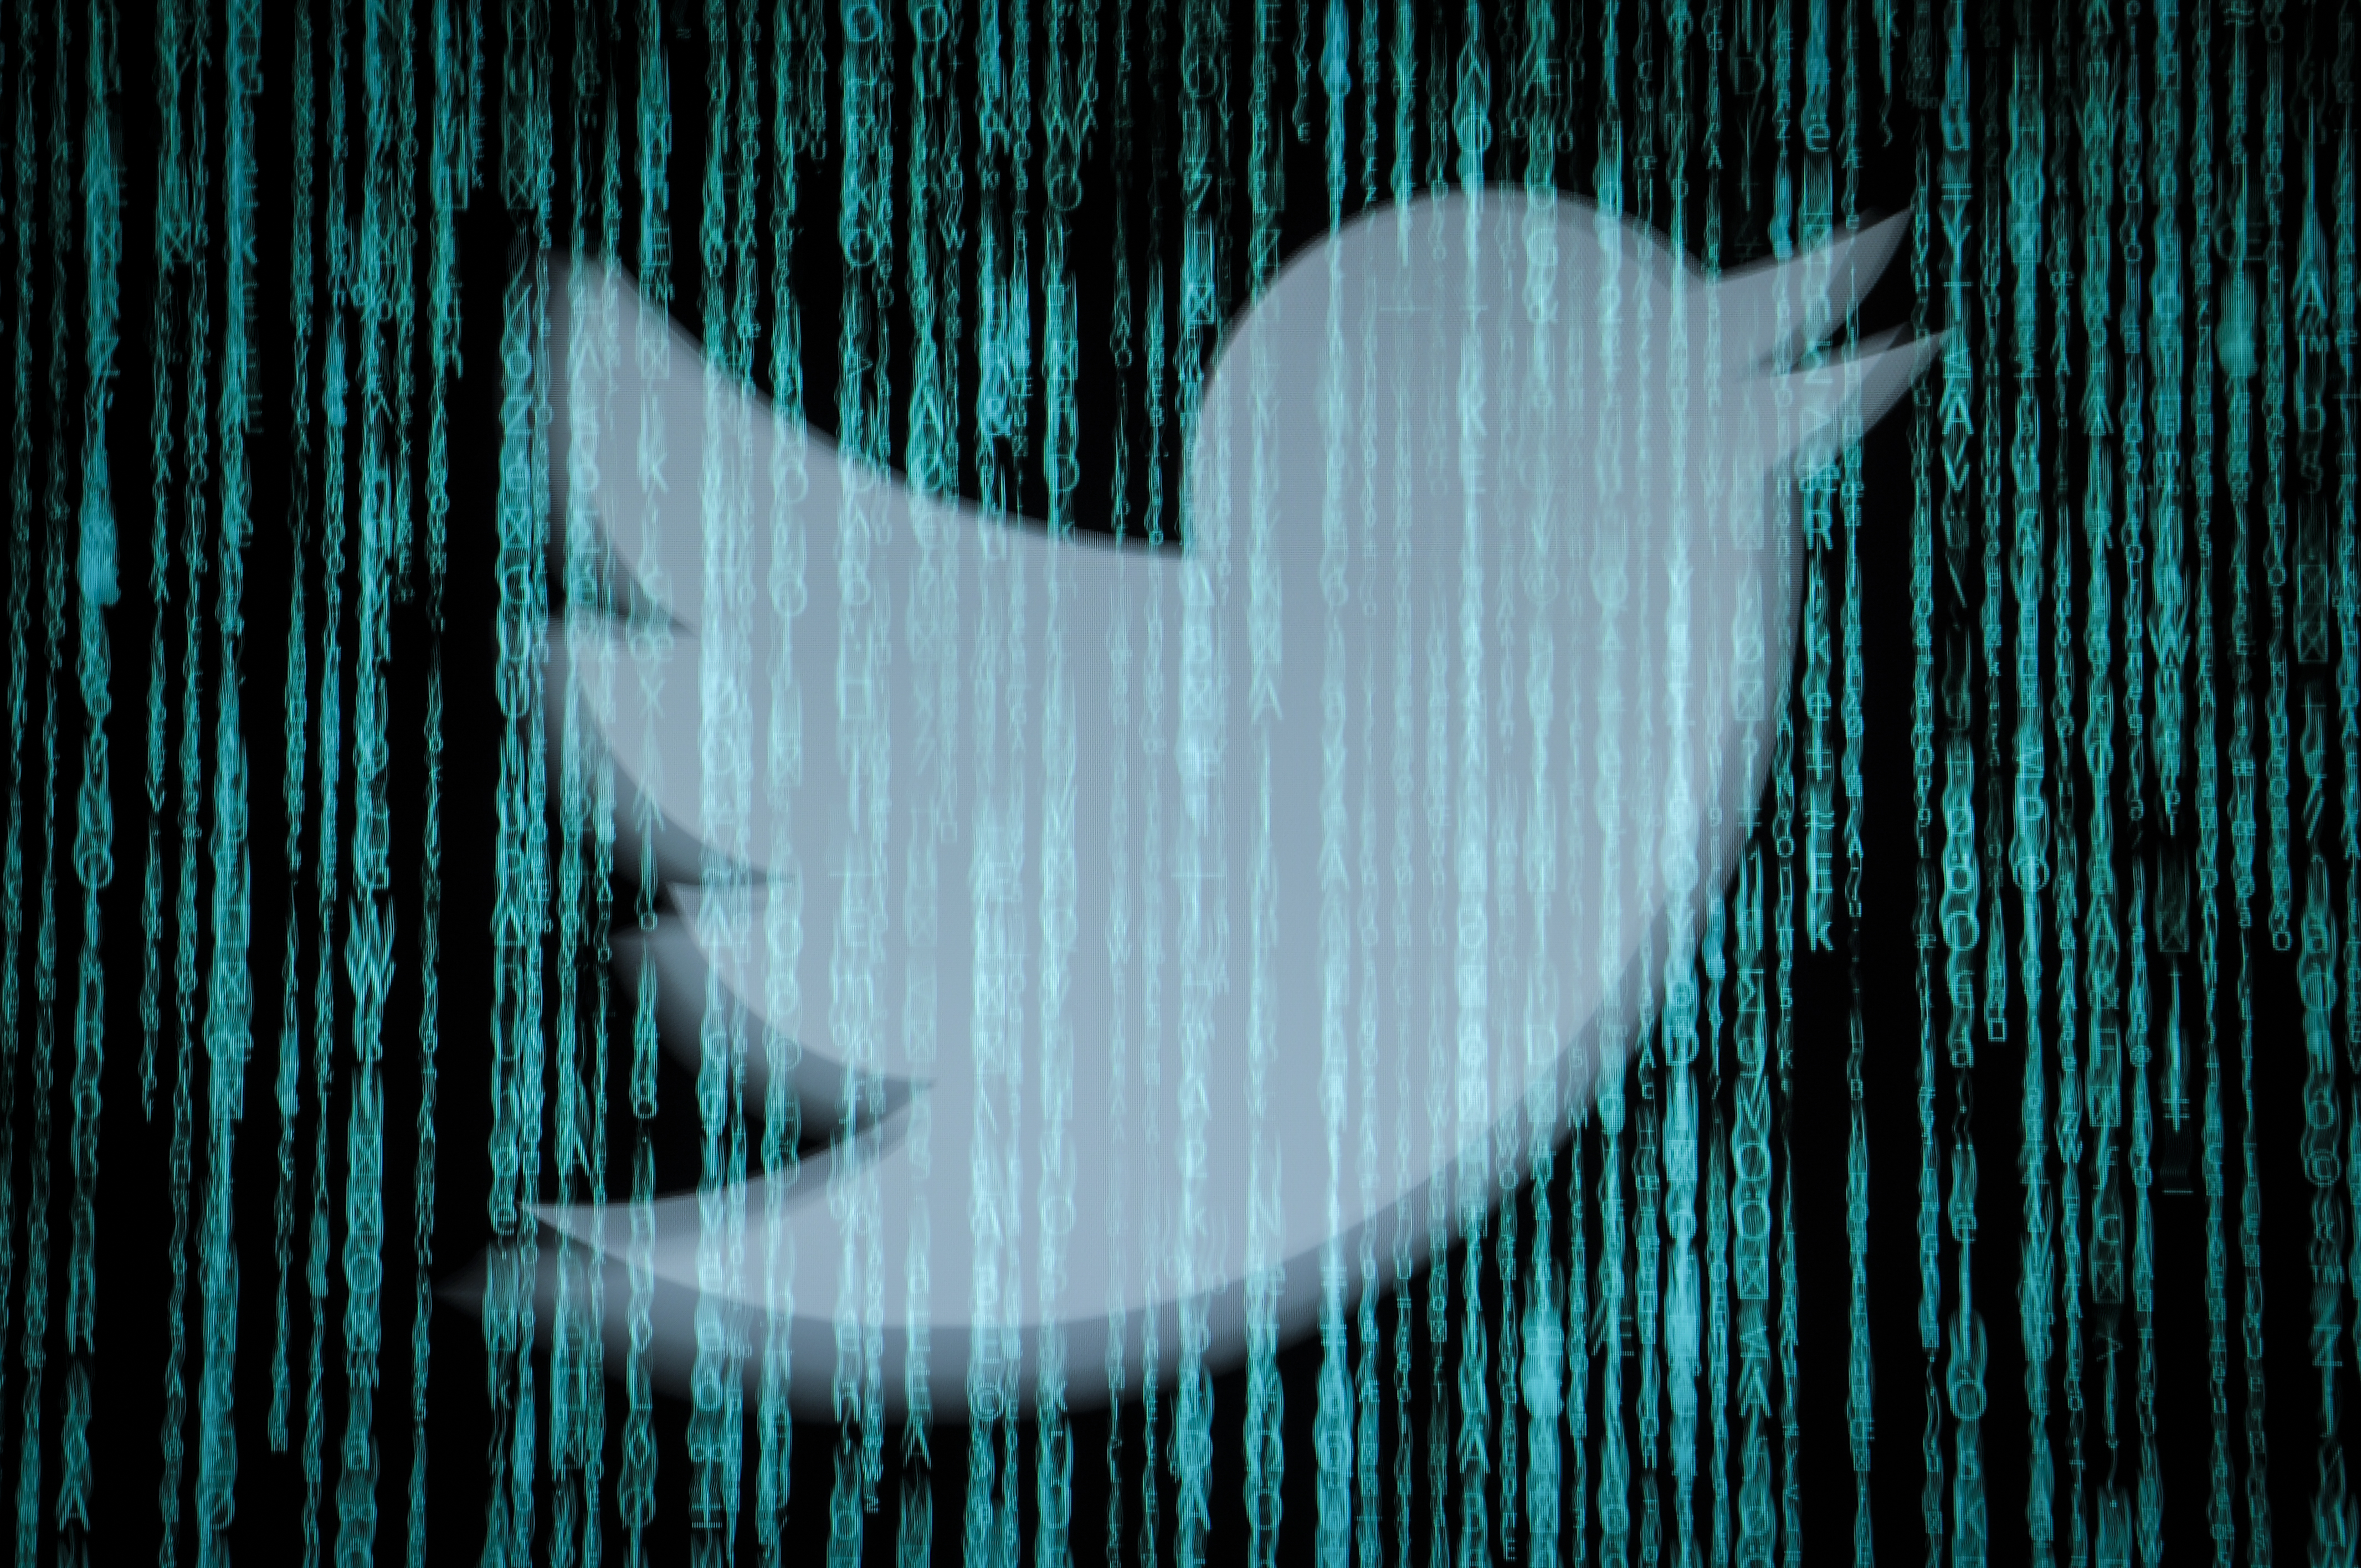 Apple, Biden, Musk and other high-profile Twitter accounts hacked in crypto  scam | TechCrunch